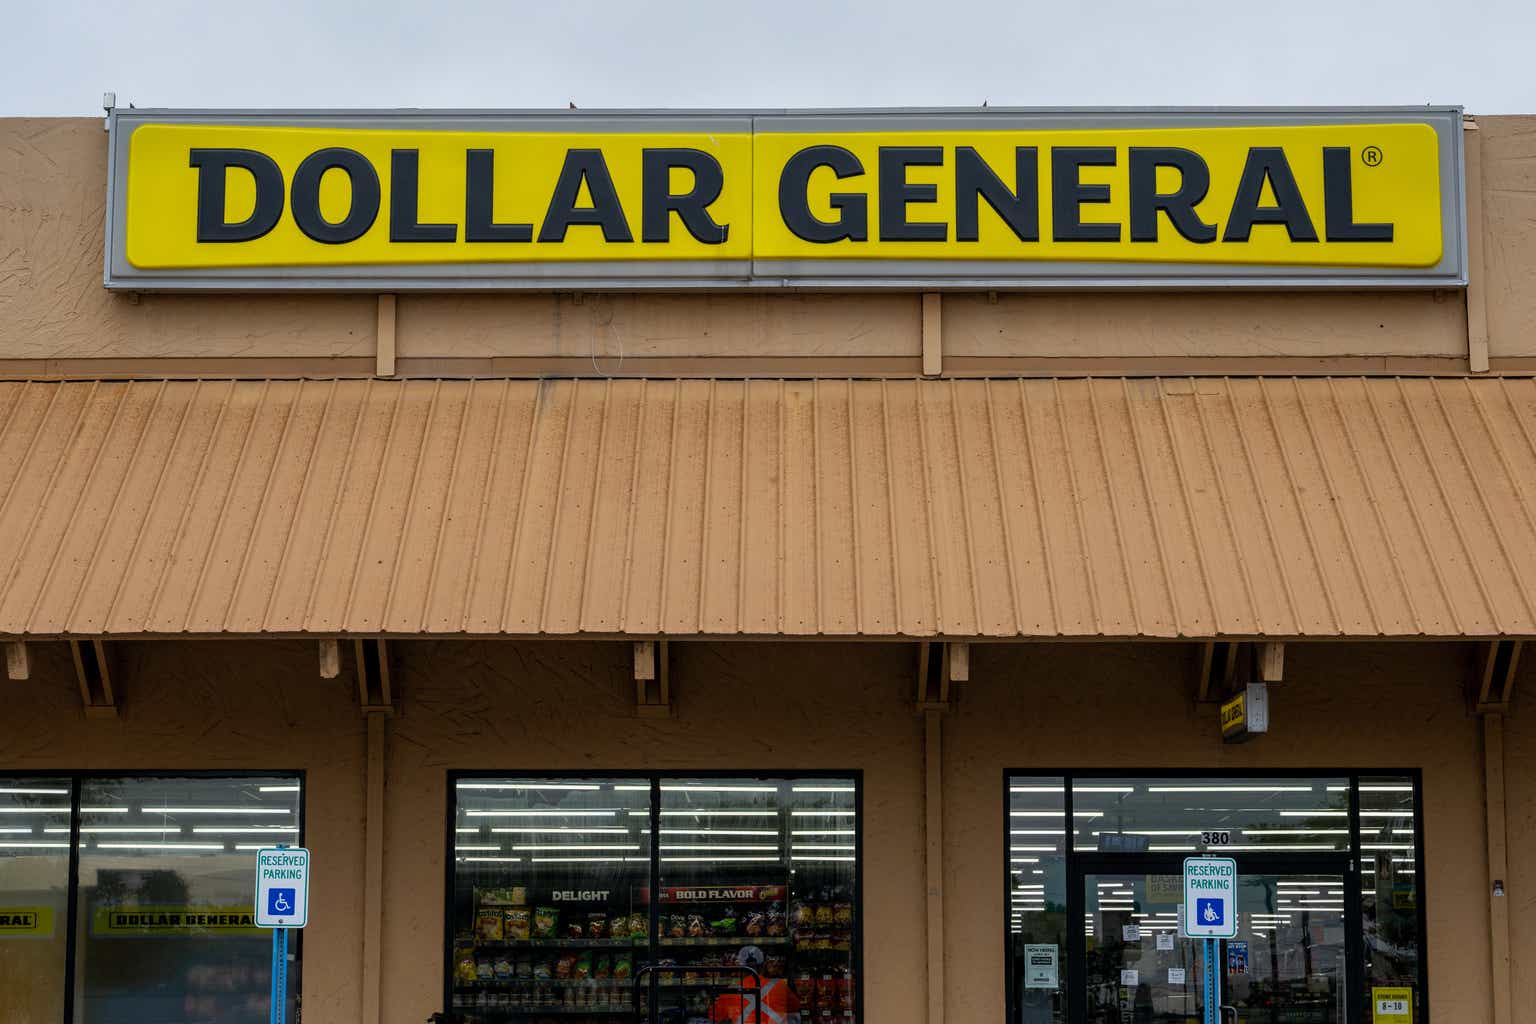 Dollar General: Has The Stock Become A Buffett-Style Fat Pitch?